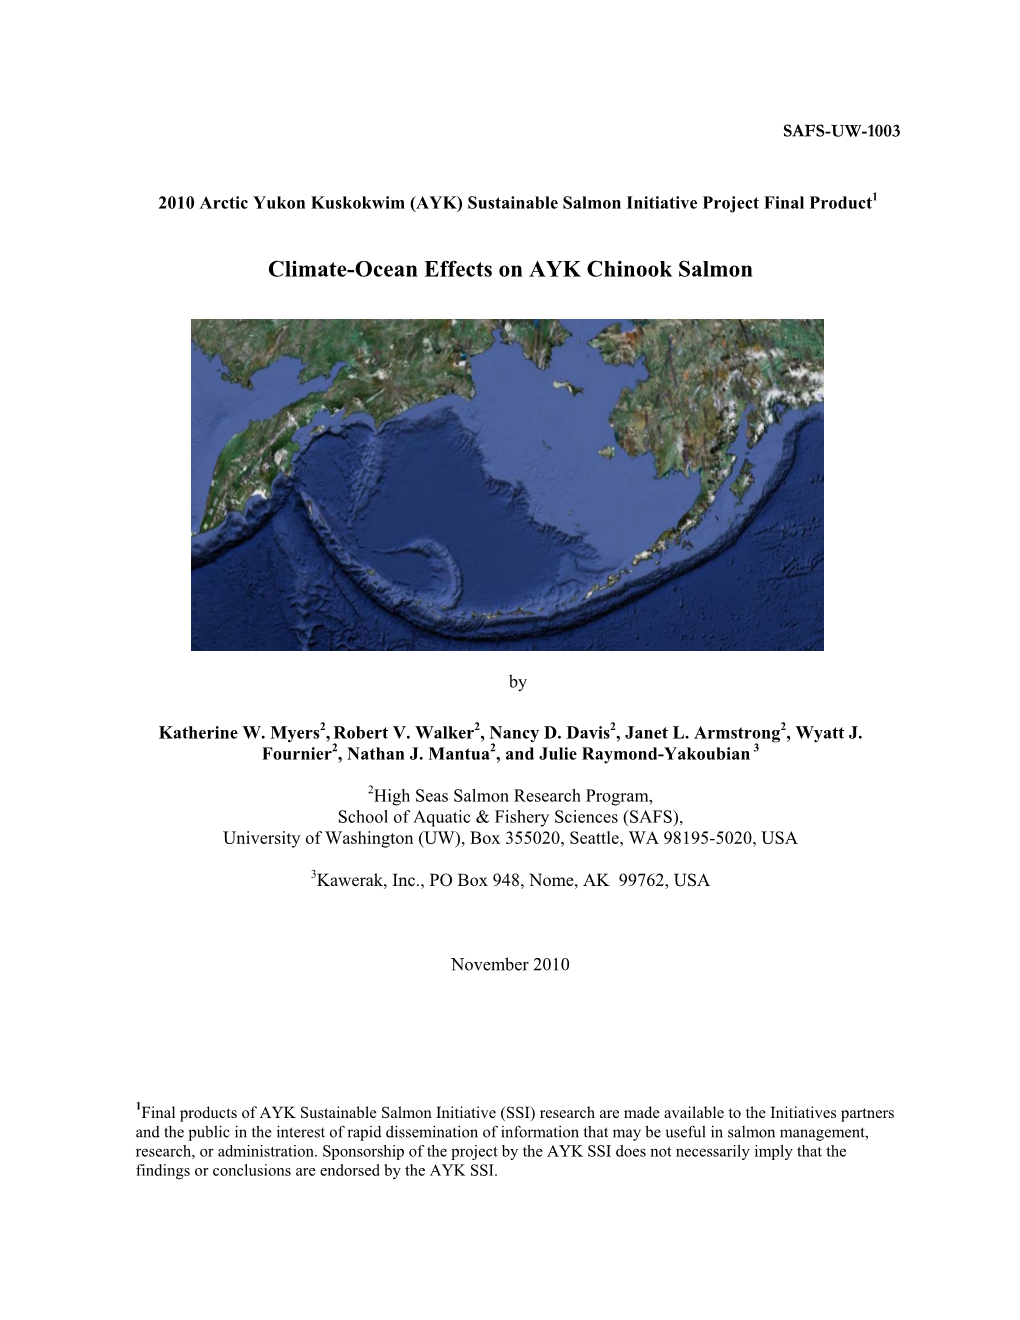 Climate-Ocean Effects on AYK Chinook Salmon